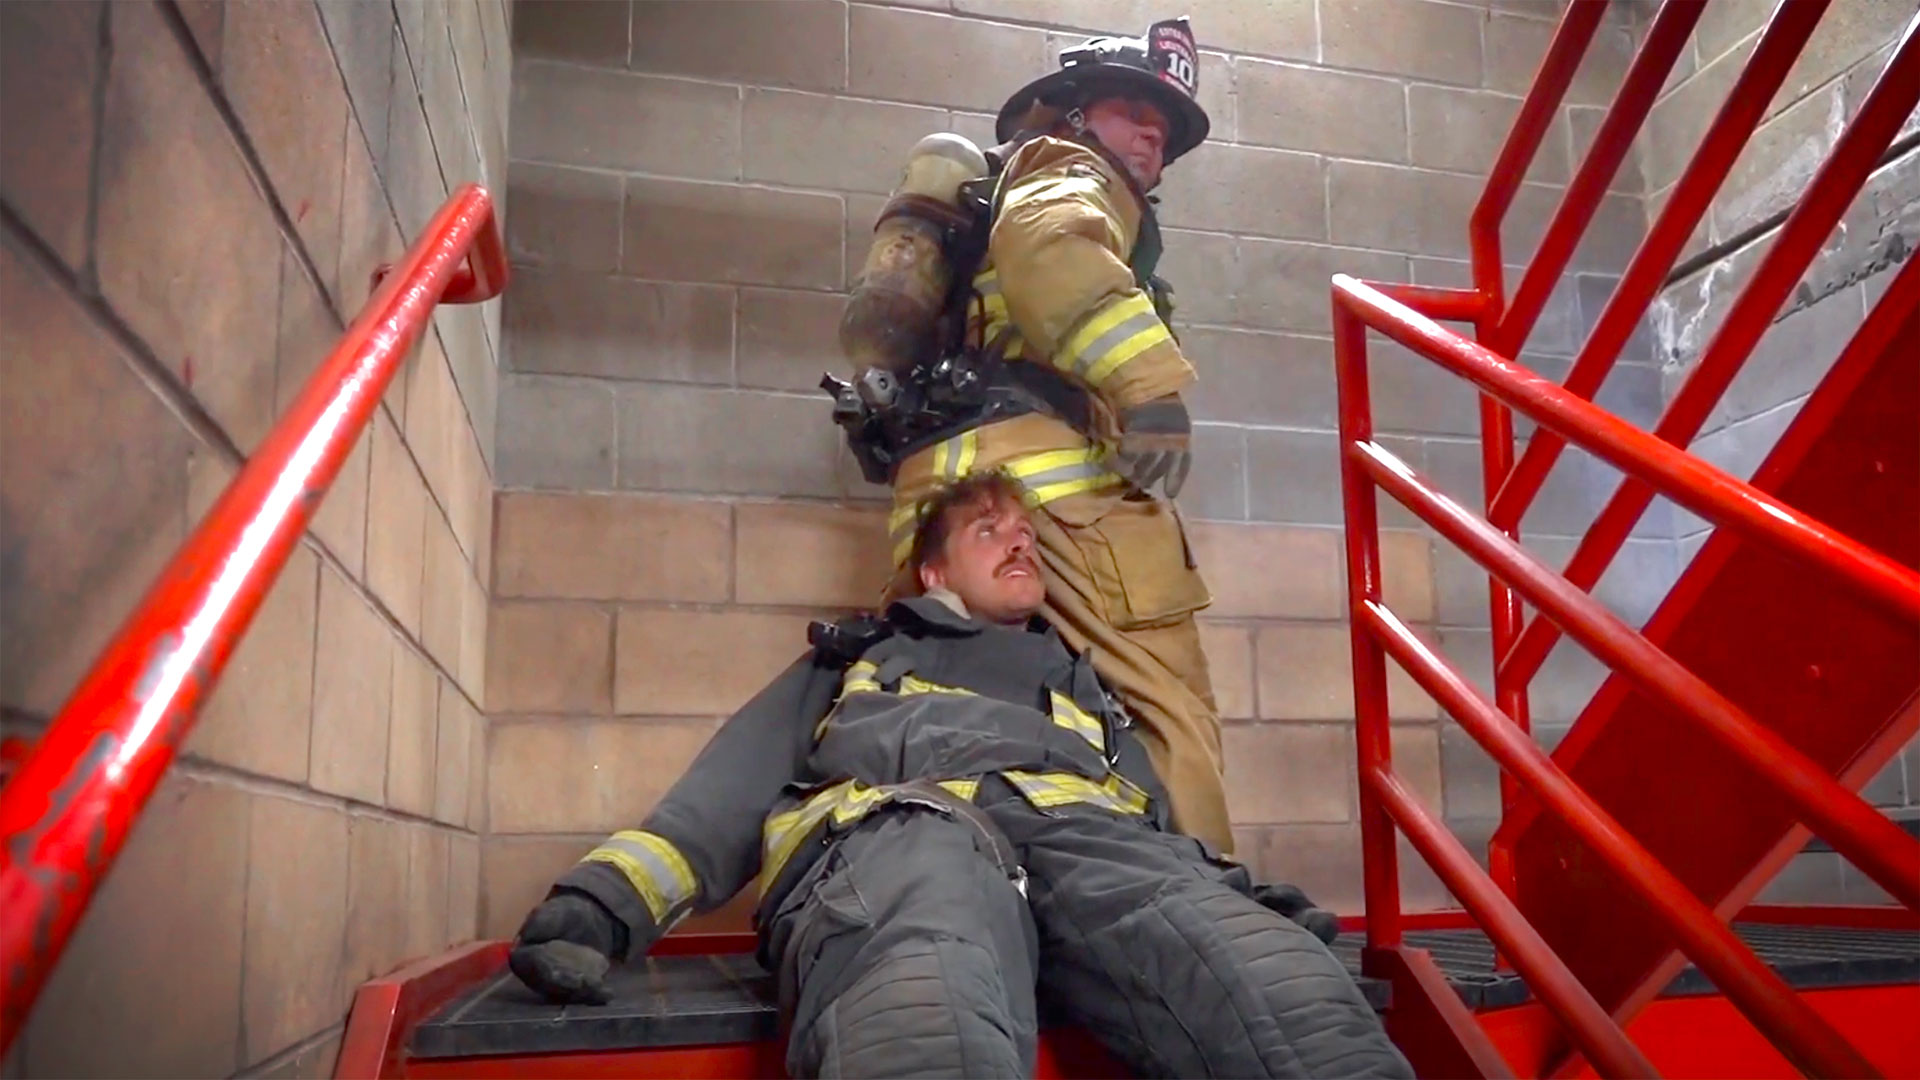 Featured image for “How to remove a fallen firefighter from a stairwell using various fire rescue techniques, pending on how many crewmates are available to assist.”